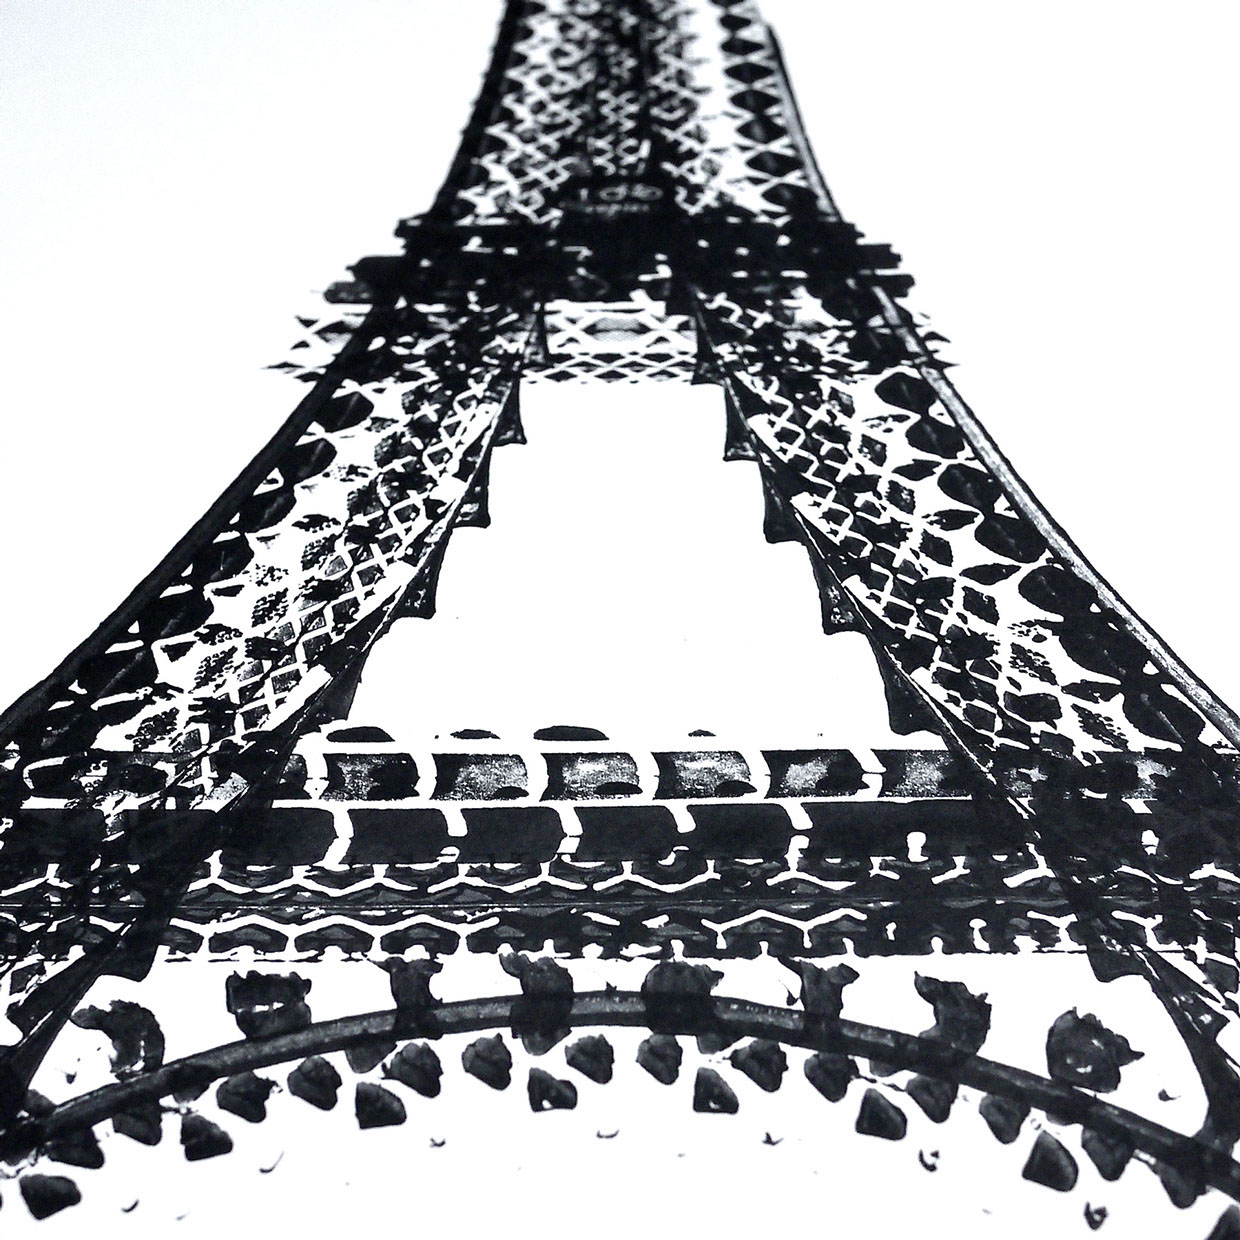 7 Architectural Landmarks Made with Bike Tire Tracks